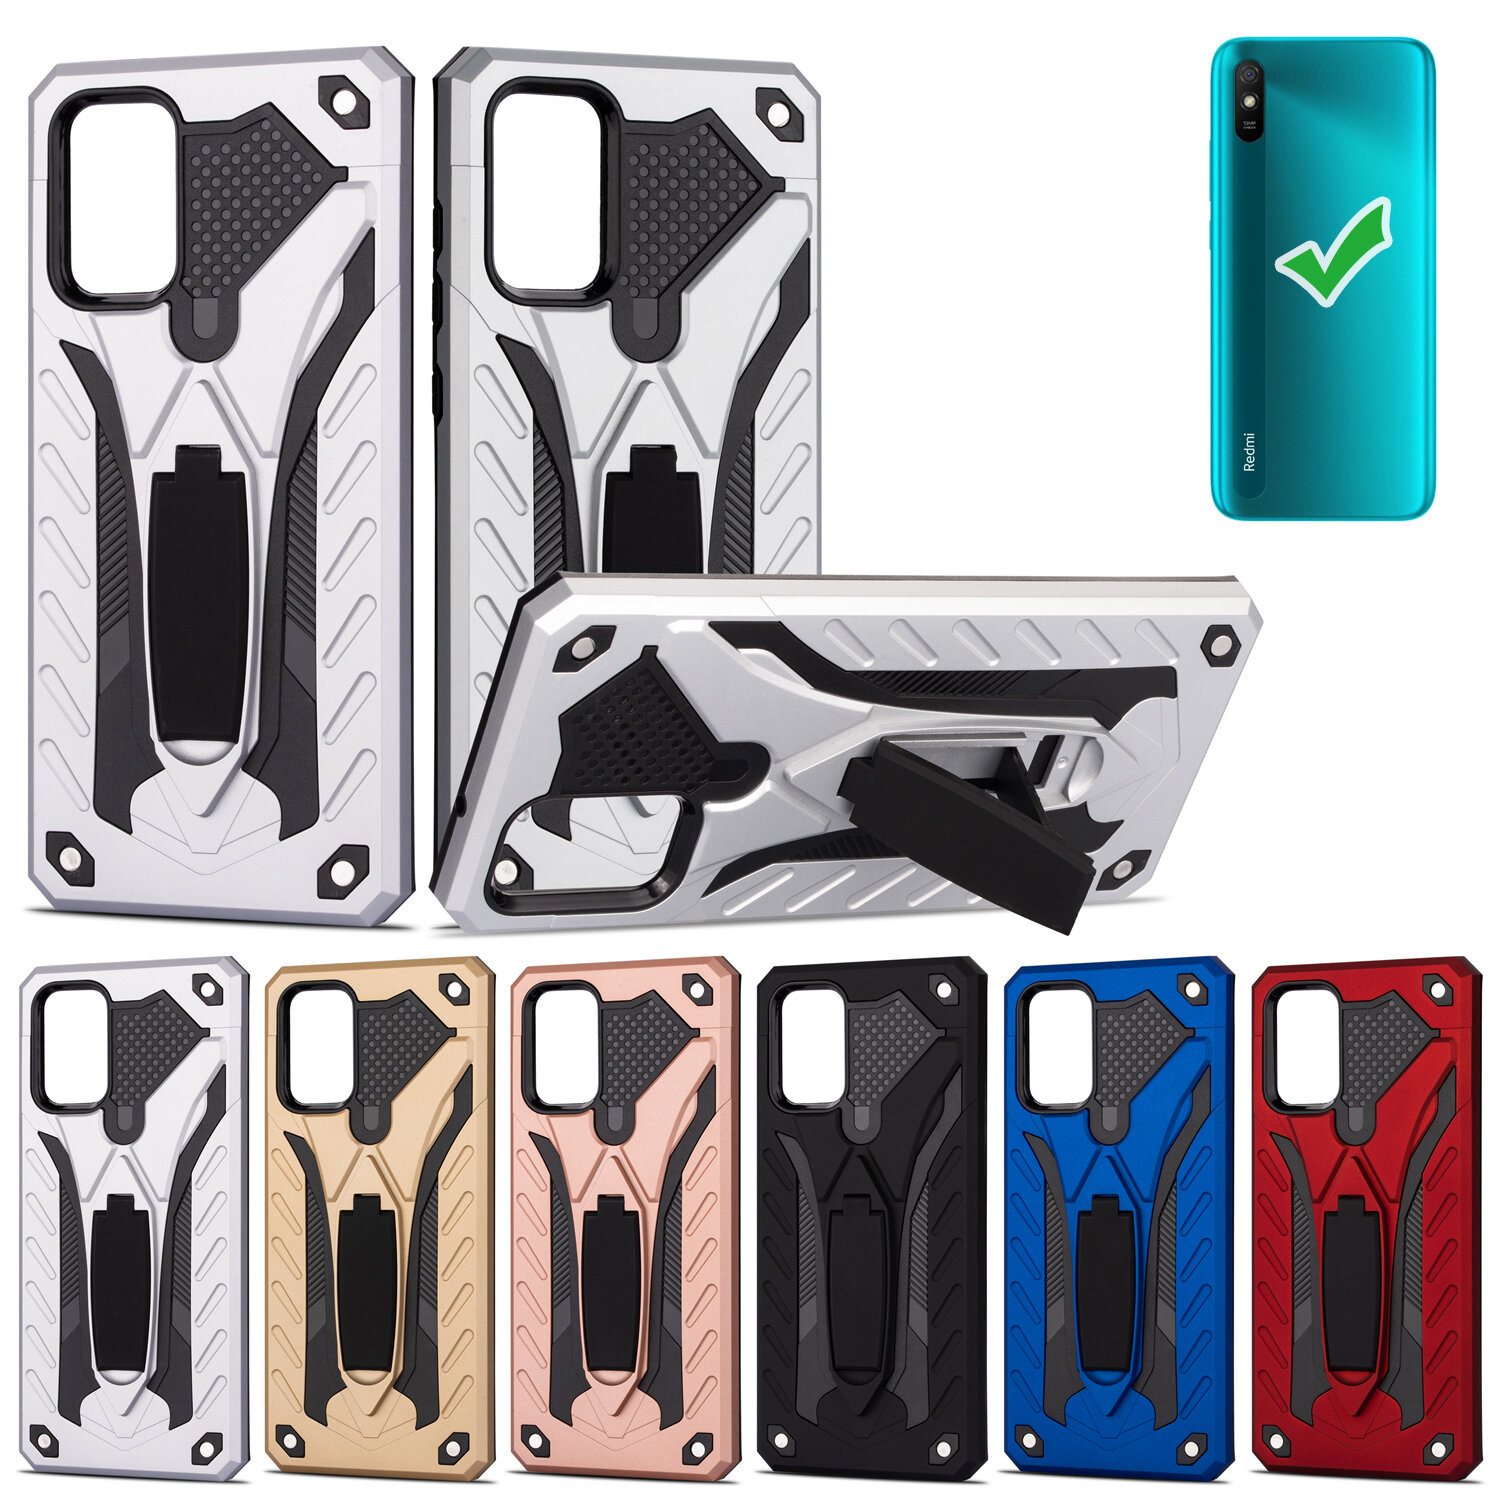 Bakeey for Xiaomi Redmi 9A Case Armor Shockproof Anti-Fingerprint with Ring Bracket Stand PC + TPU P